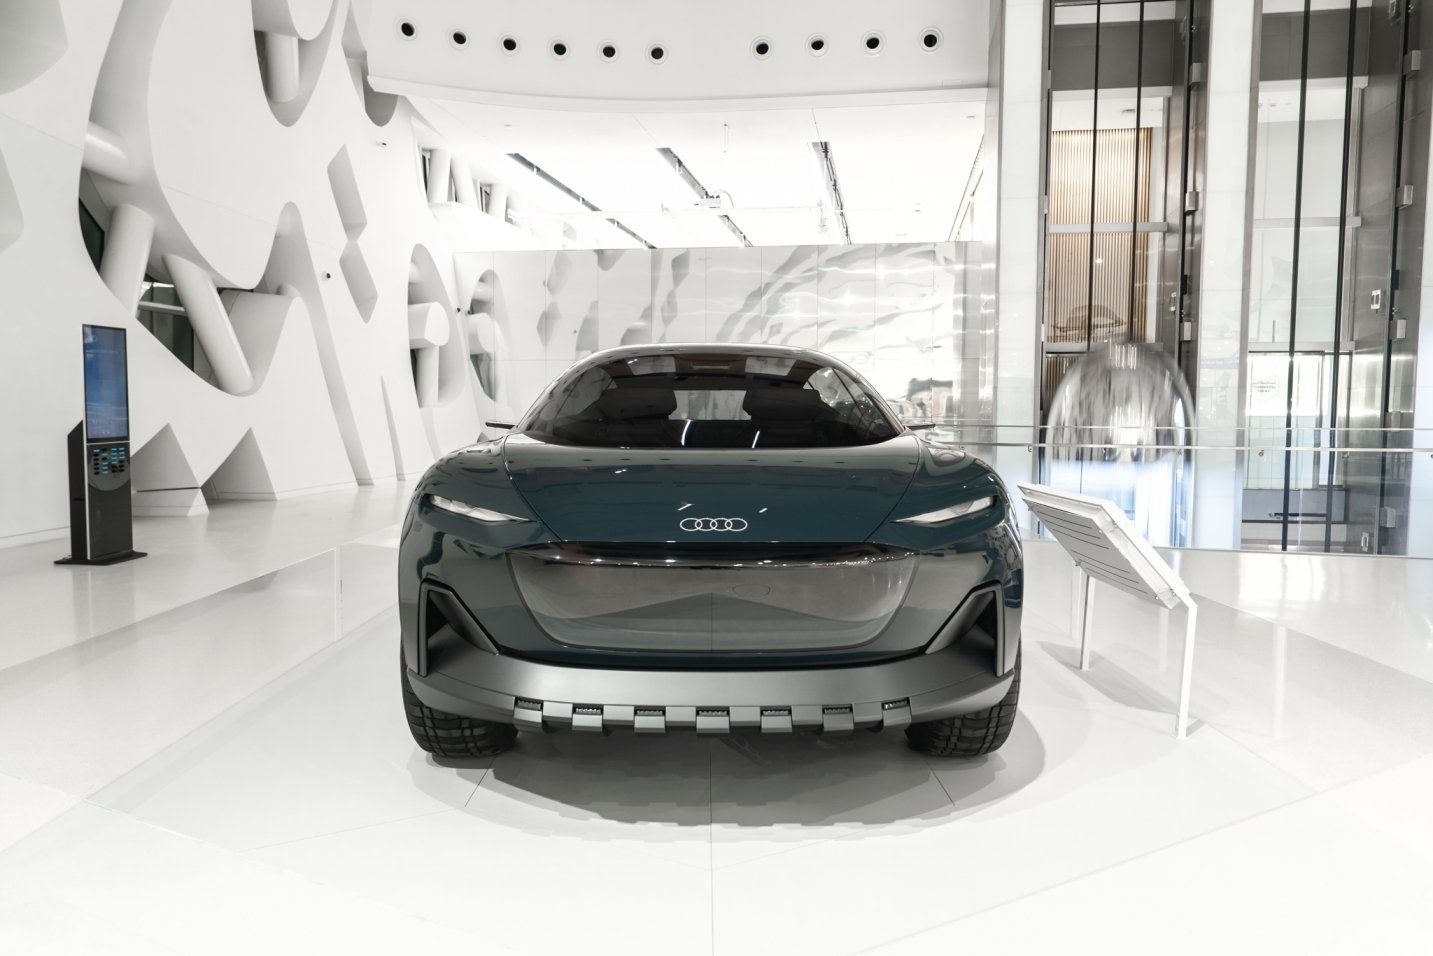 Audi Middle East and Museum of the Future enter 3rd year of partnership, with the showcase of the revolutionary activesphere concept